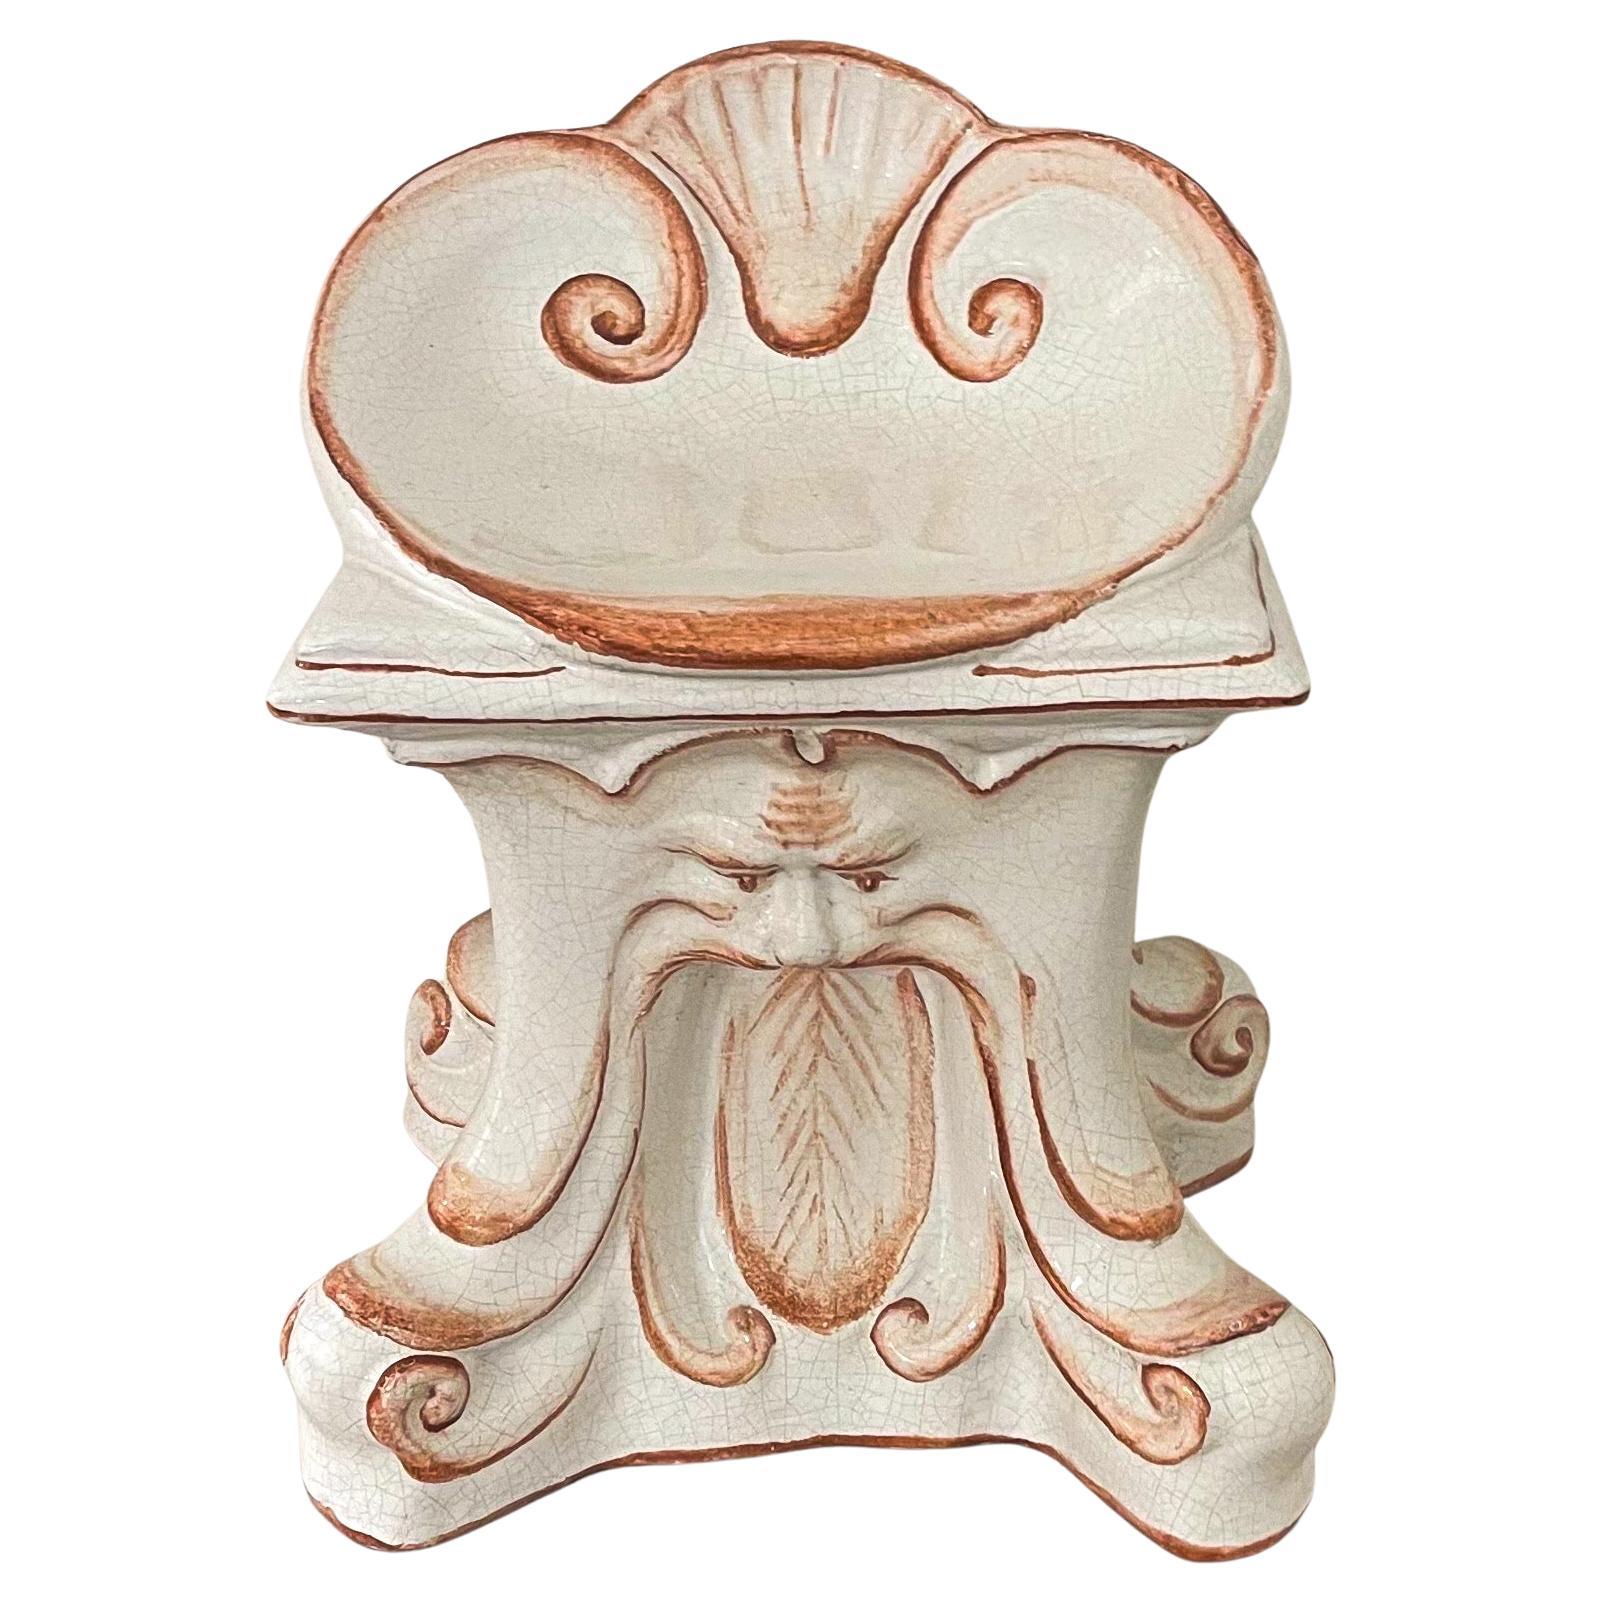 1960s Italian Terracotta North Wind and Shell Motif Garden Seat / Chair / Stool